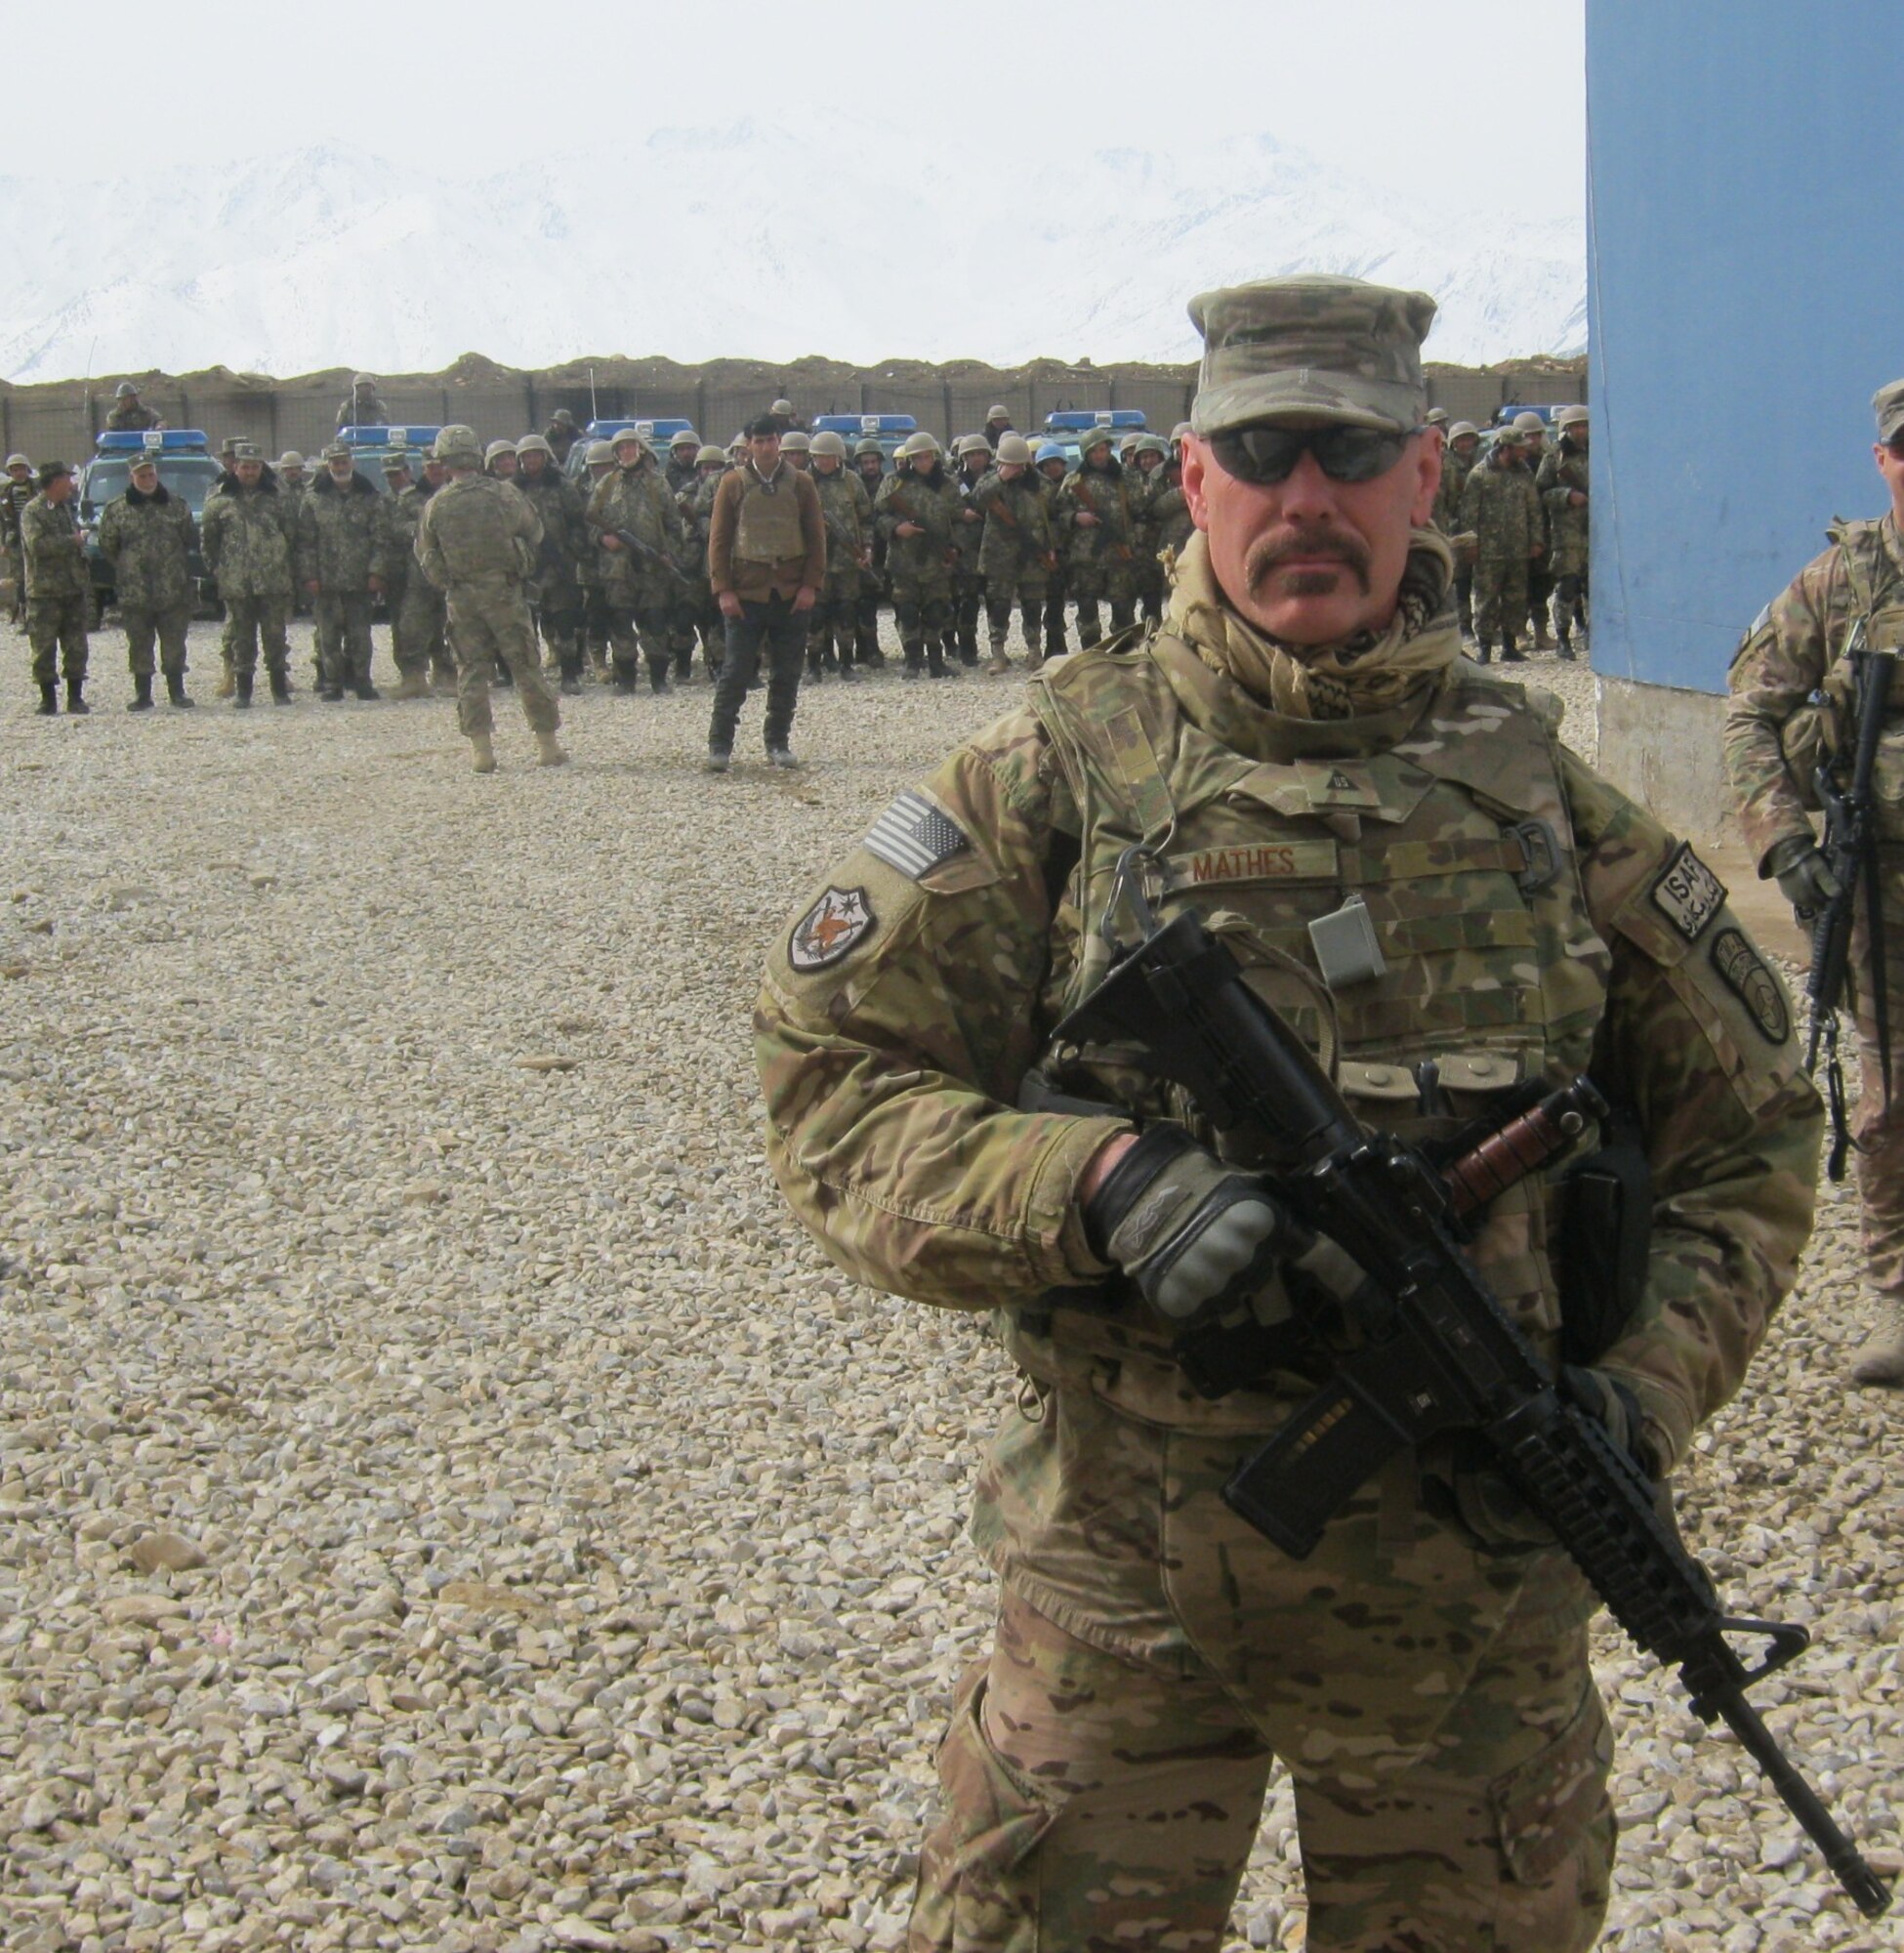 Former Tinker AFB employee Randy Mathes in Wardak Province, Afghanistan, as he assists in the operational standup of the first Afghan security battalion his NATO task force helped establish. (Courtesy photo)